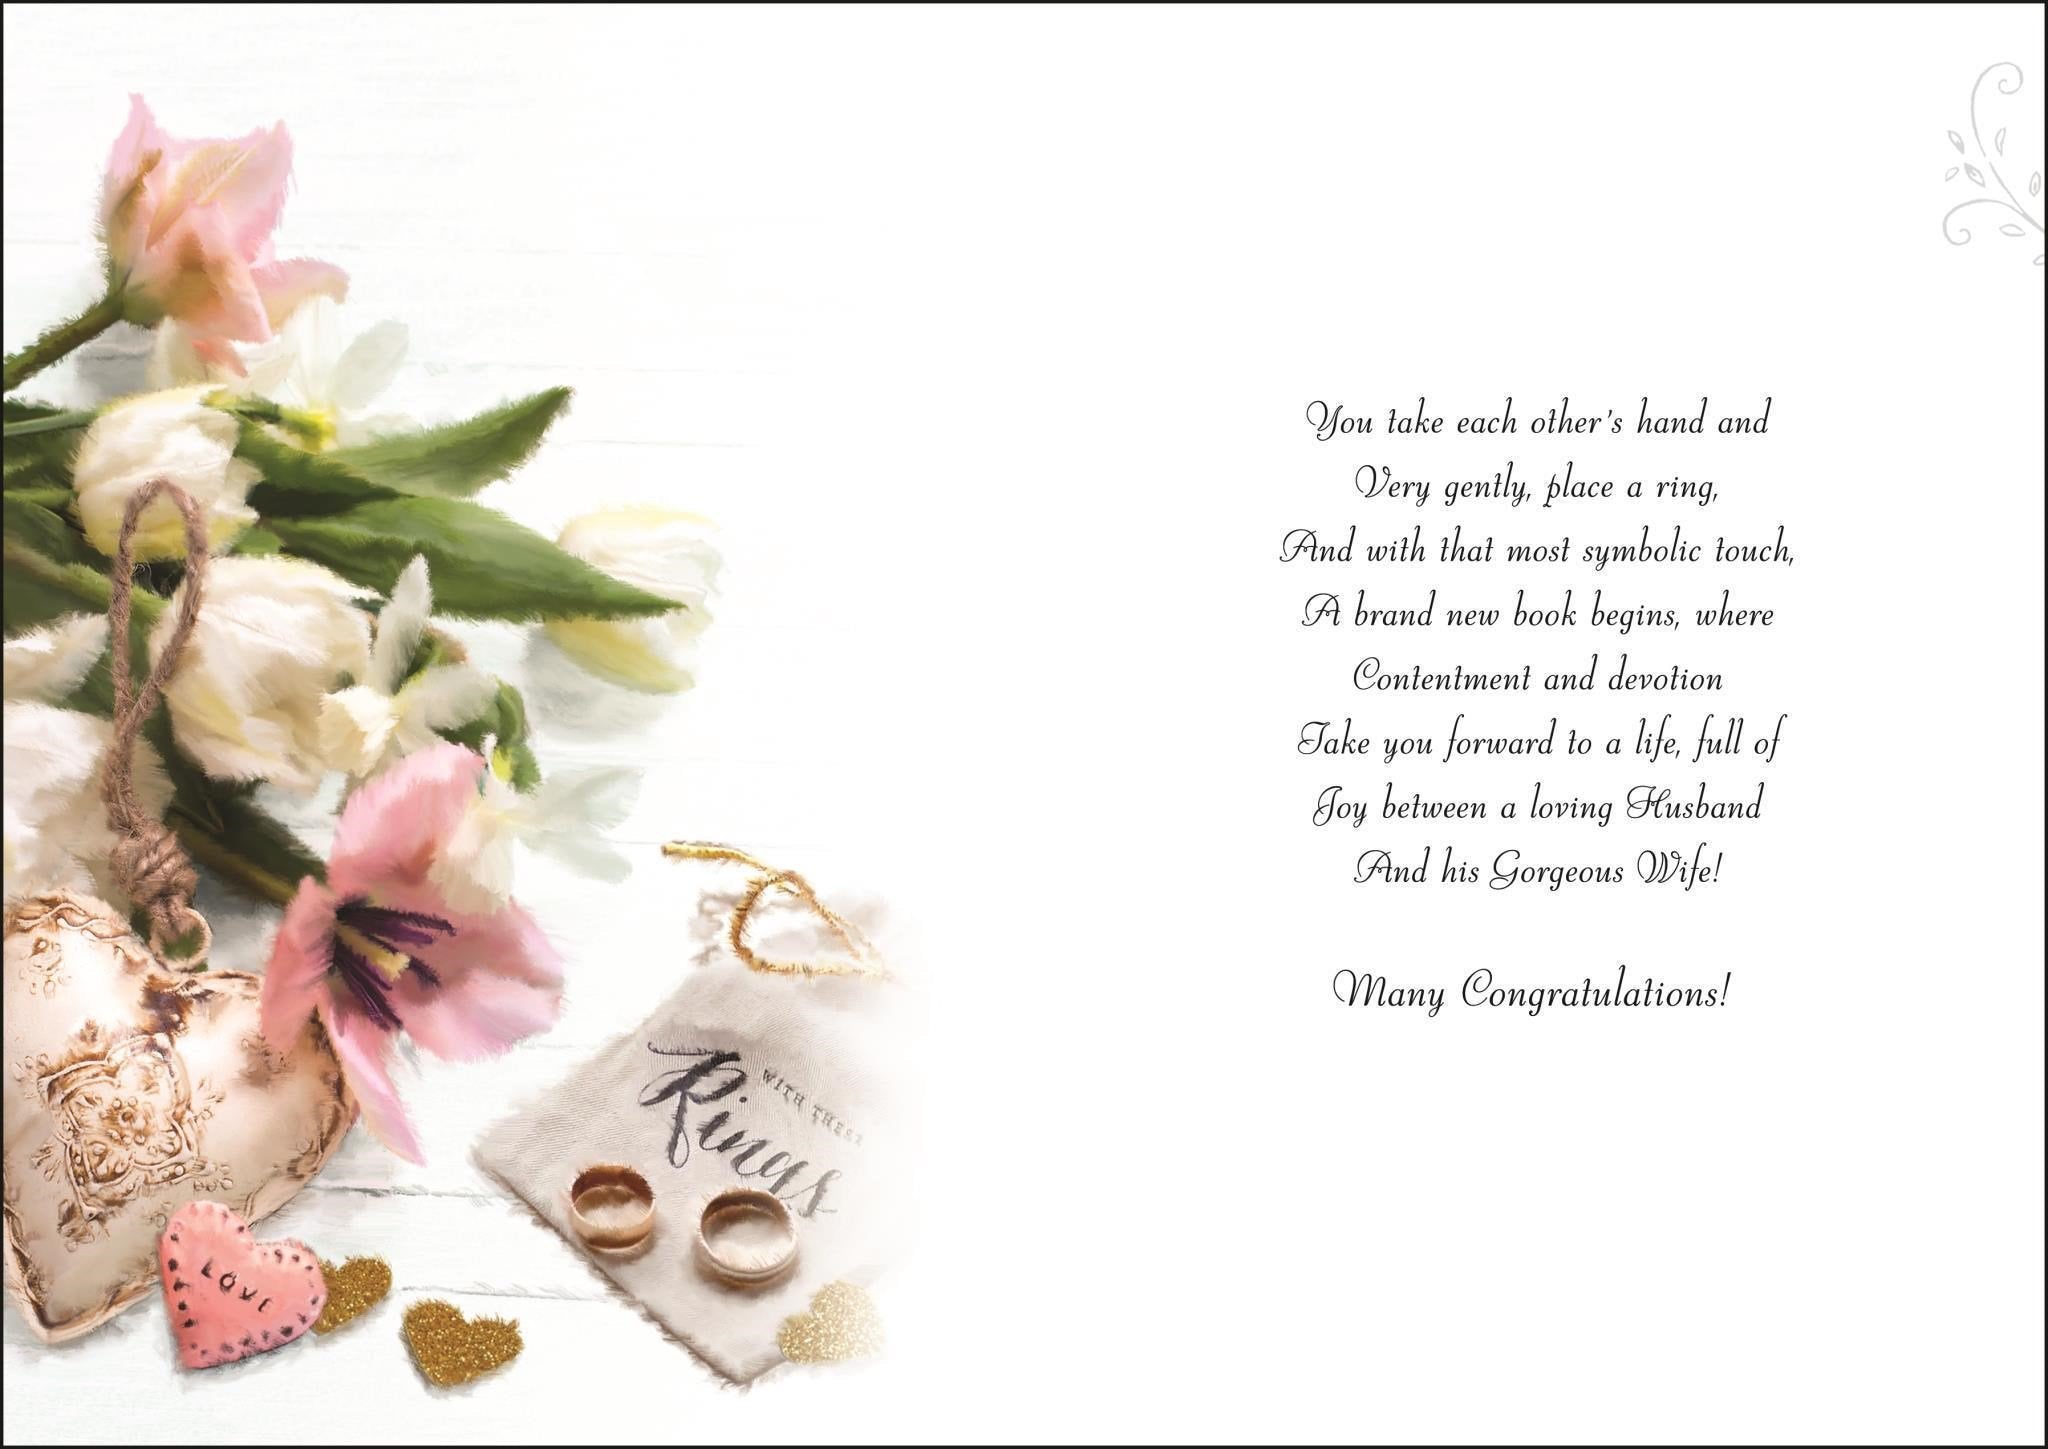 Inside of Wedding Day Wishes Rings Greetings Card